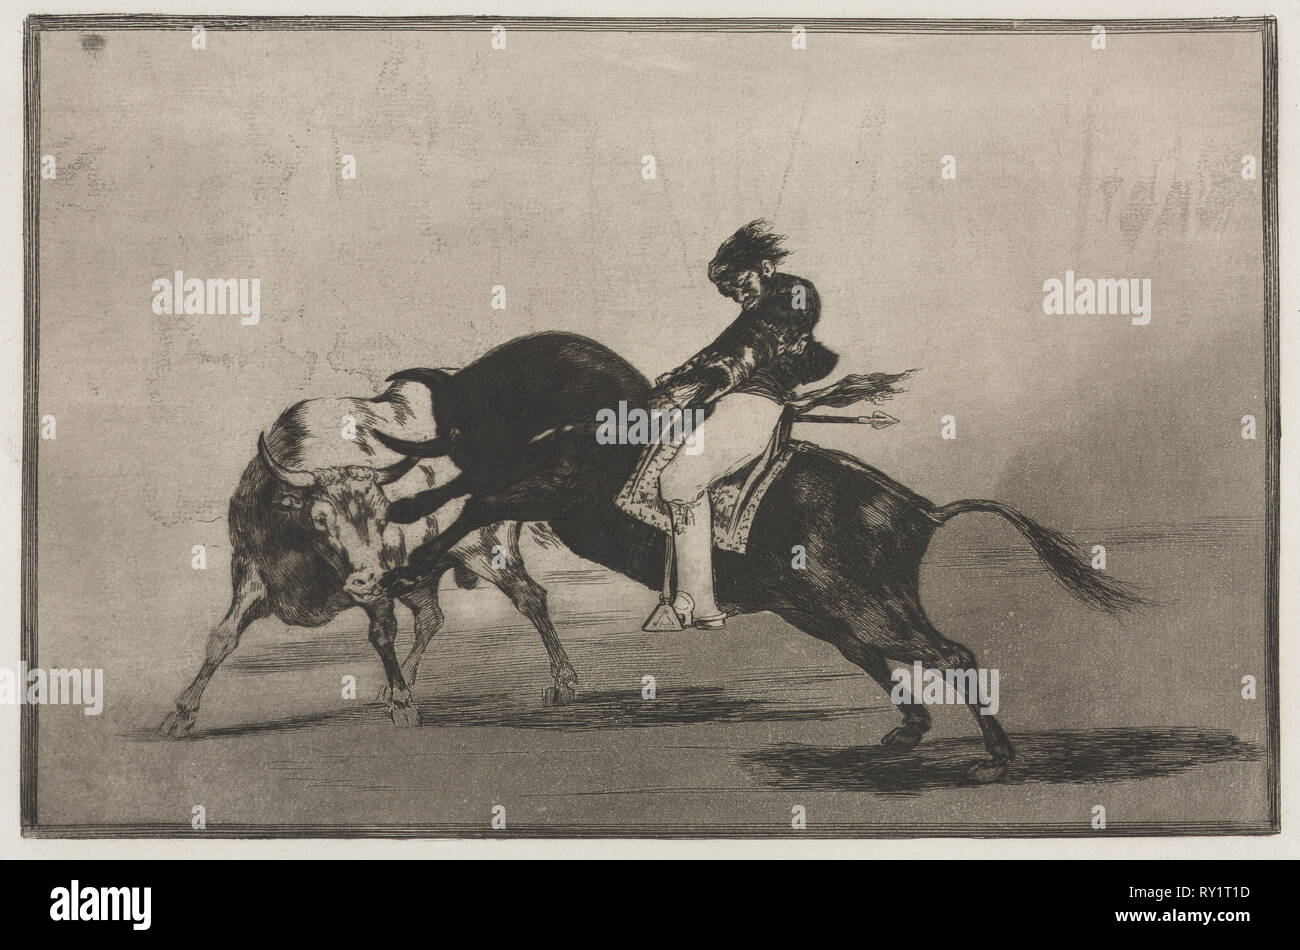 Bullfights:  The Same Ceballos Mounted on Another Bull Breaks Short Spears in the Ring at Madrid, 1876. Francisco de Goya (Spanish, 1746-1828). Engraving Stock Photo